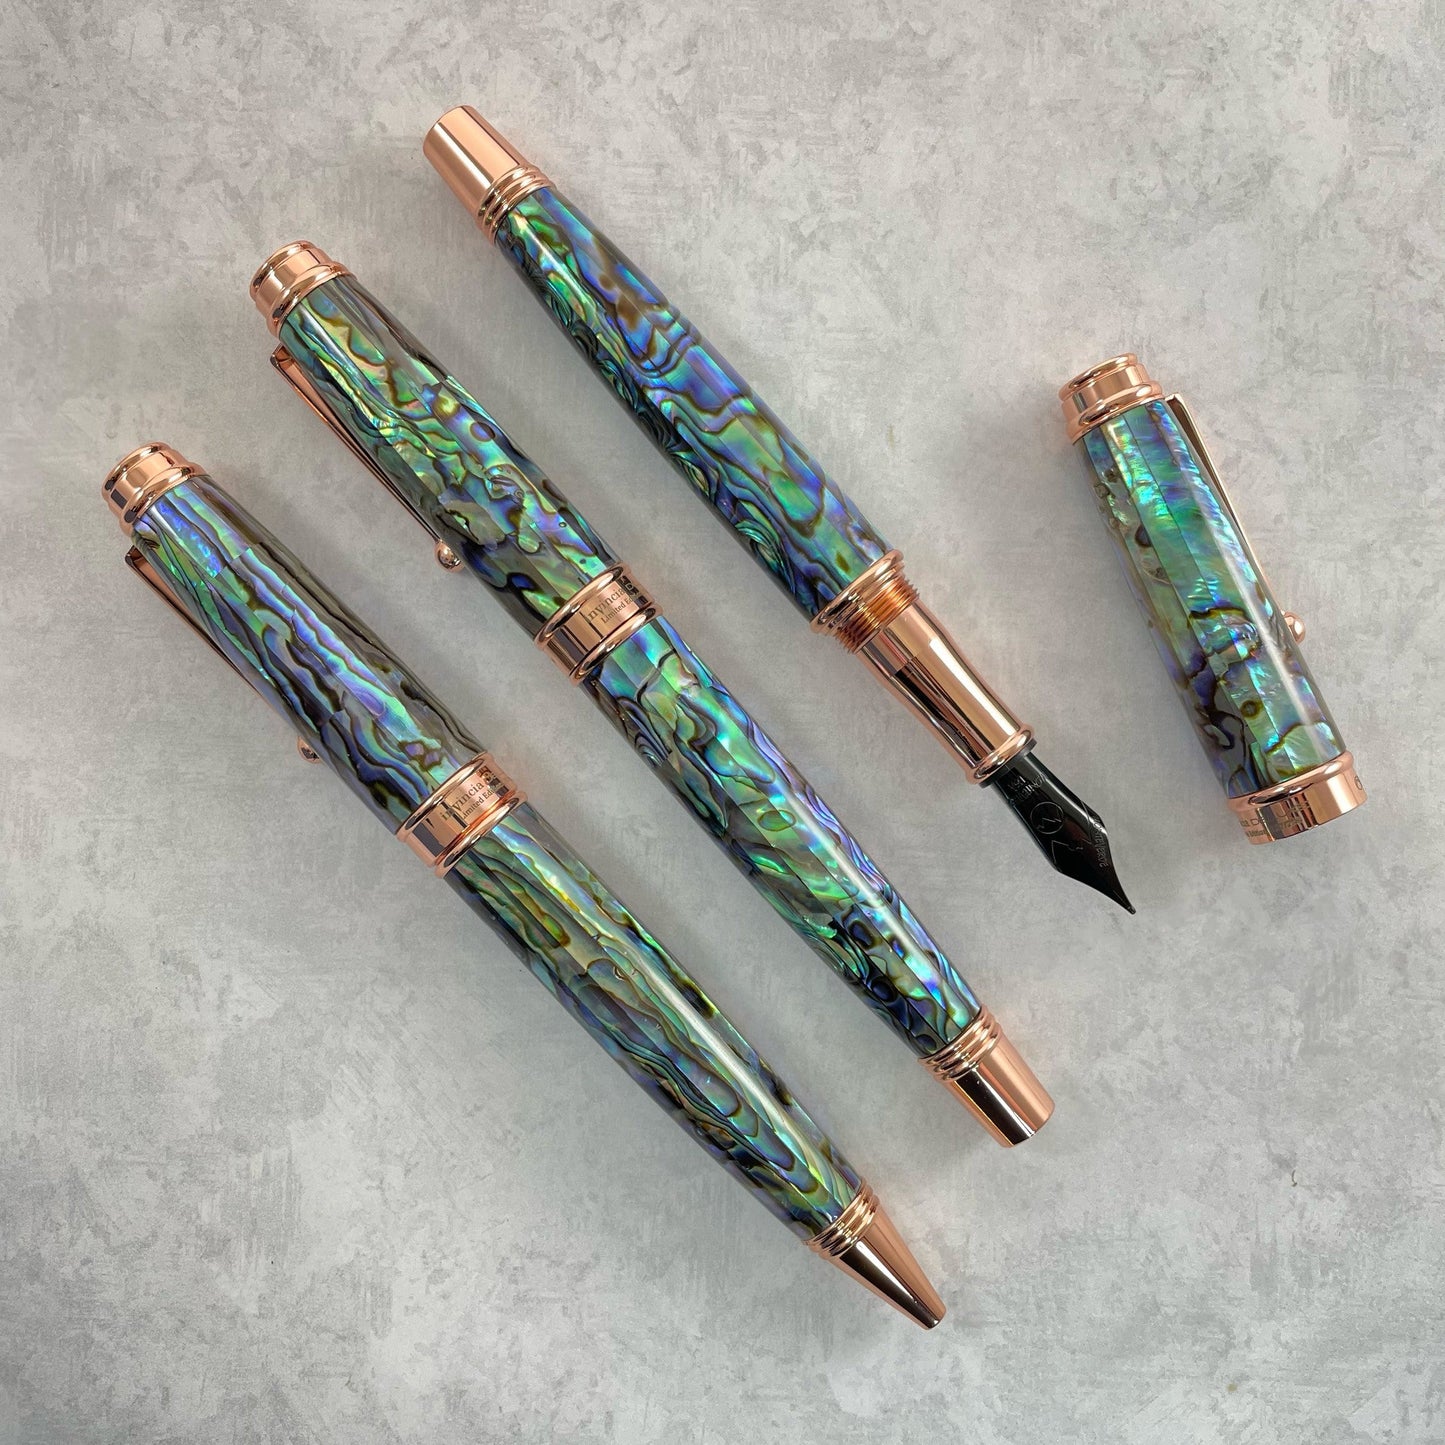 Monteverde Invincia Deluxe Ballpoint - Abalone with Rose Gold Trim (Limited Edition)